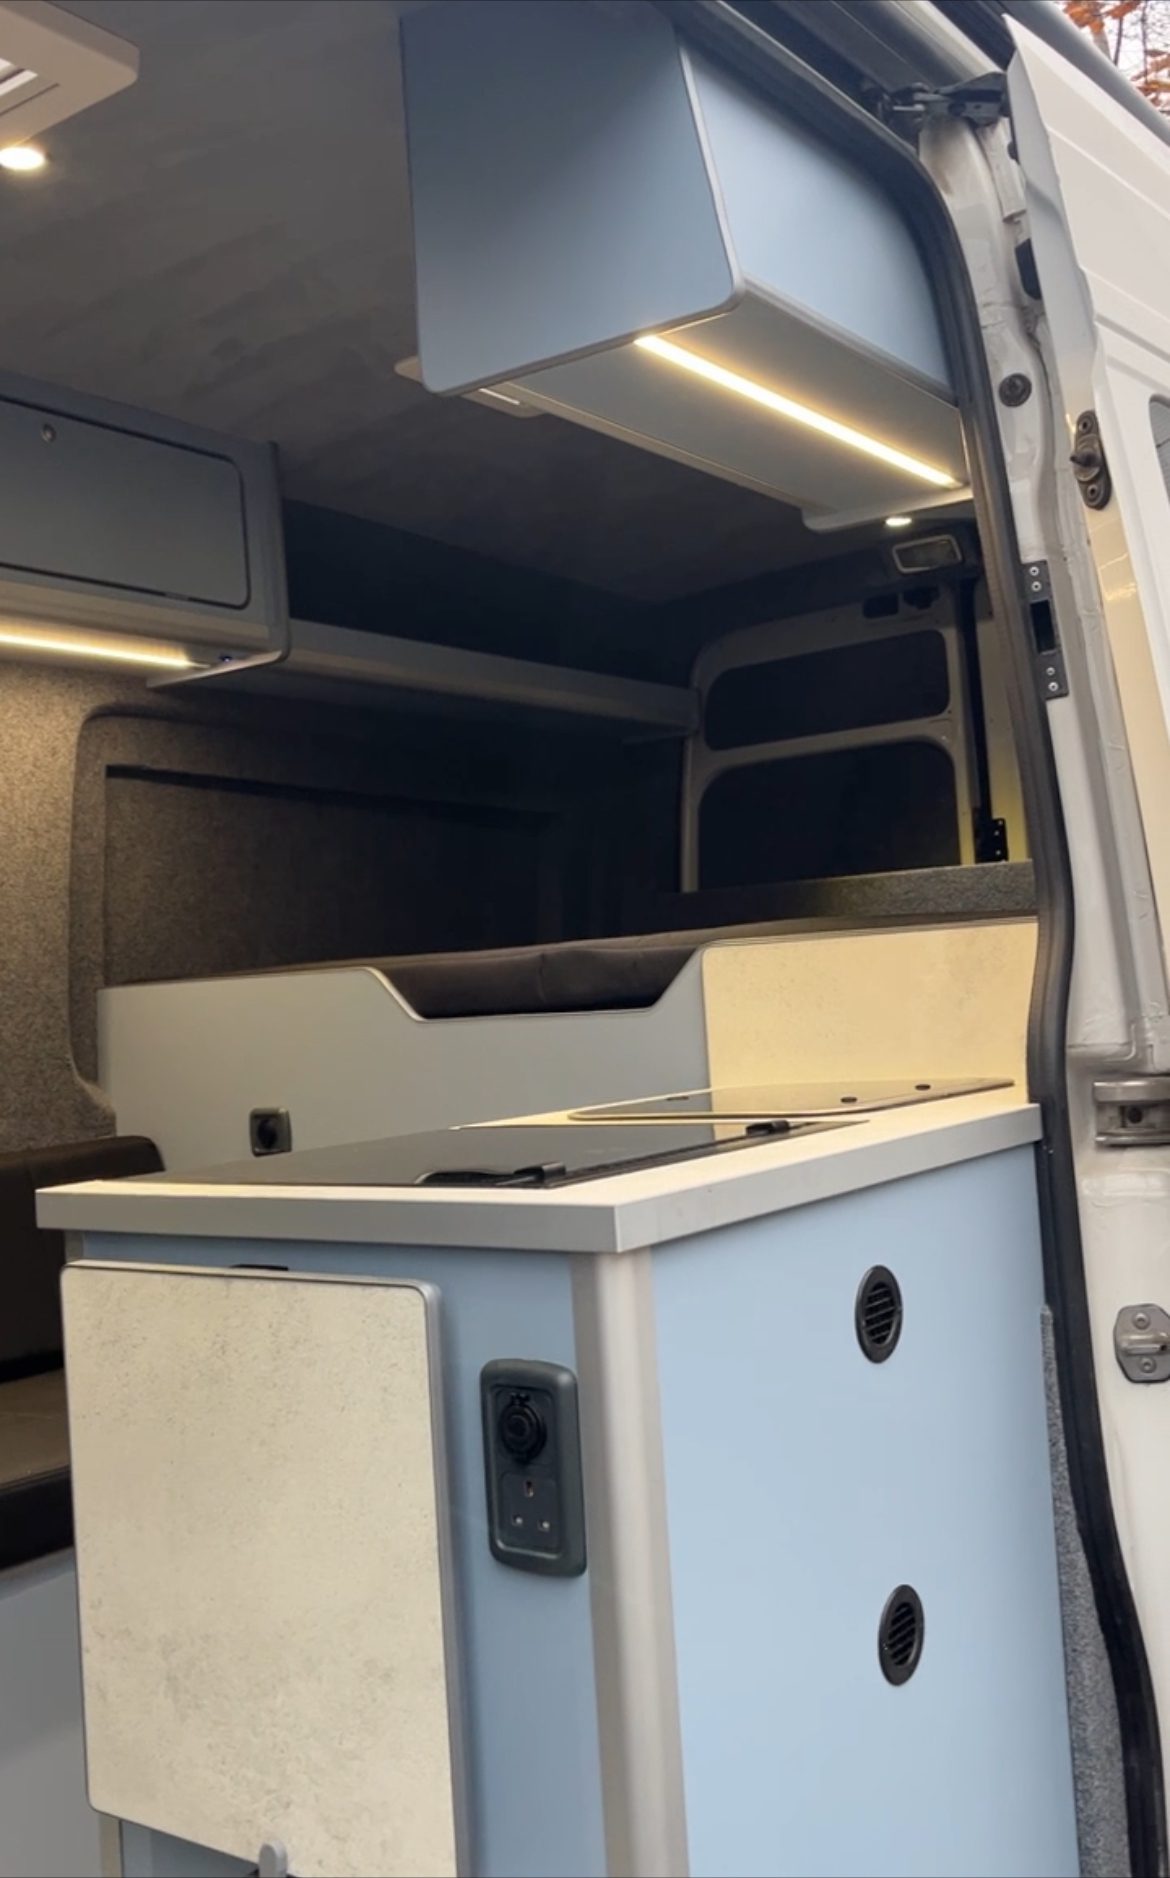 VW Crafter Conversions into a camper van with space for bikes2